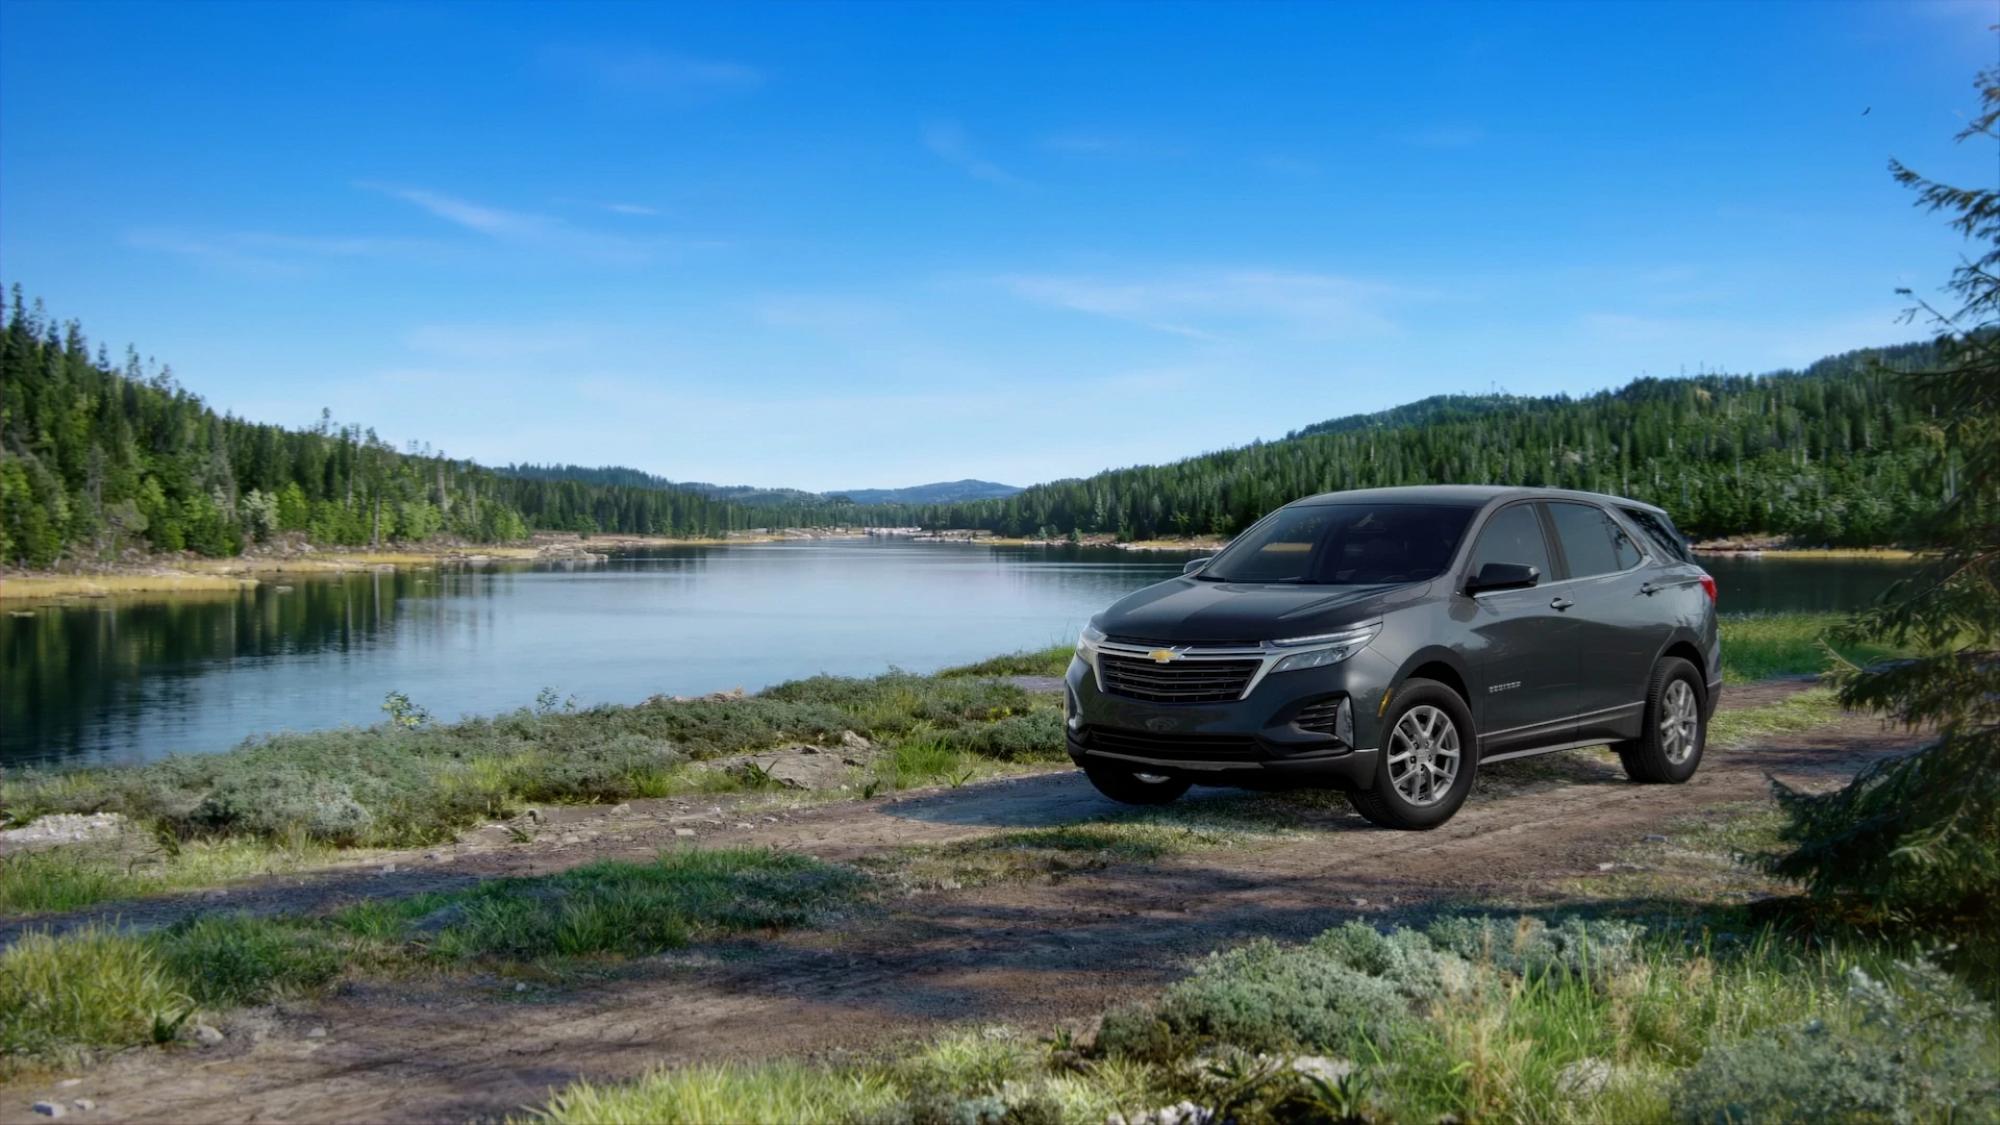 A sleek black Chevrolet SUV on a dirt road in front of a lake